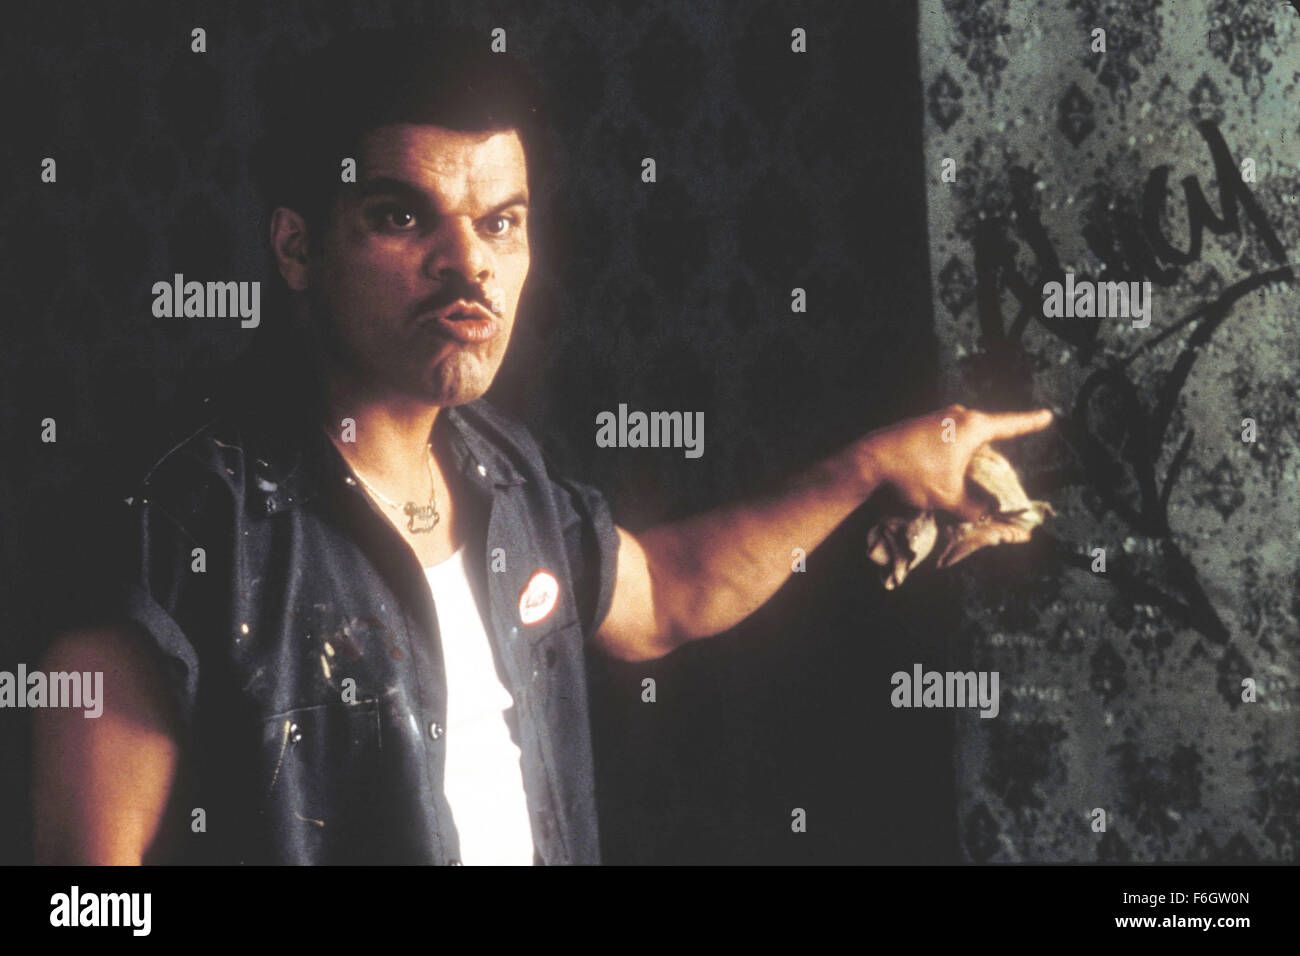 Mar 11, 2001; Hollywood, CA, USA; Actor LUIS GUZMAN as Juan Benitez stars in a scene of the comedy-drama 'Double Whammy' directed by Tom DiCillo. A world-weary police detective who fails to stop a fast food restaurant massace struggles to regain his reputation, public image and self-worth. Stock Photo